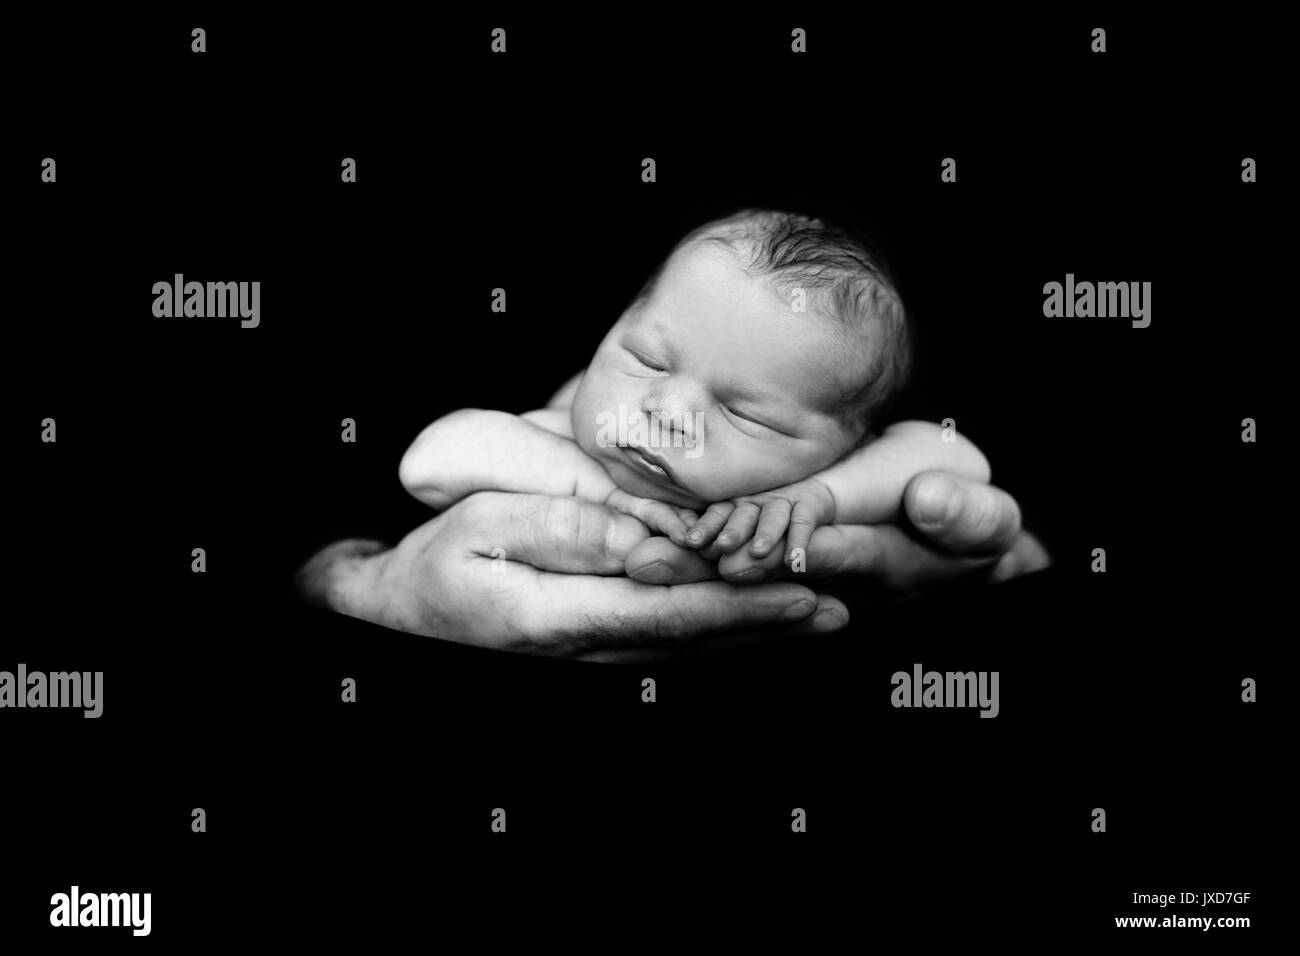 Beautiful baby boy, sleeping peacefully in fathers hands, infant sleeping, isolated image, black background, fathers love, tenderness, family concept Stock Photo